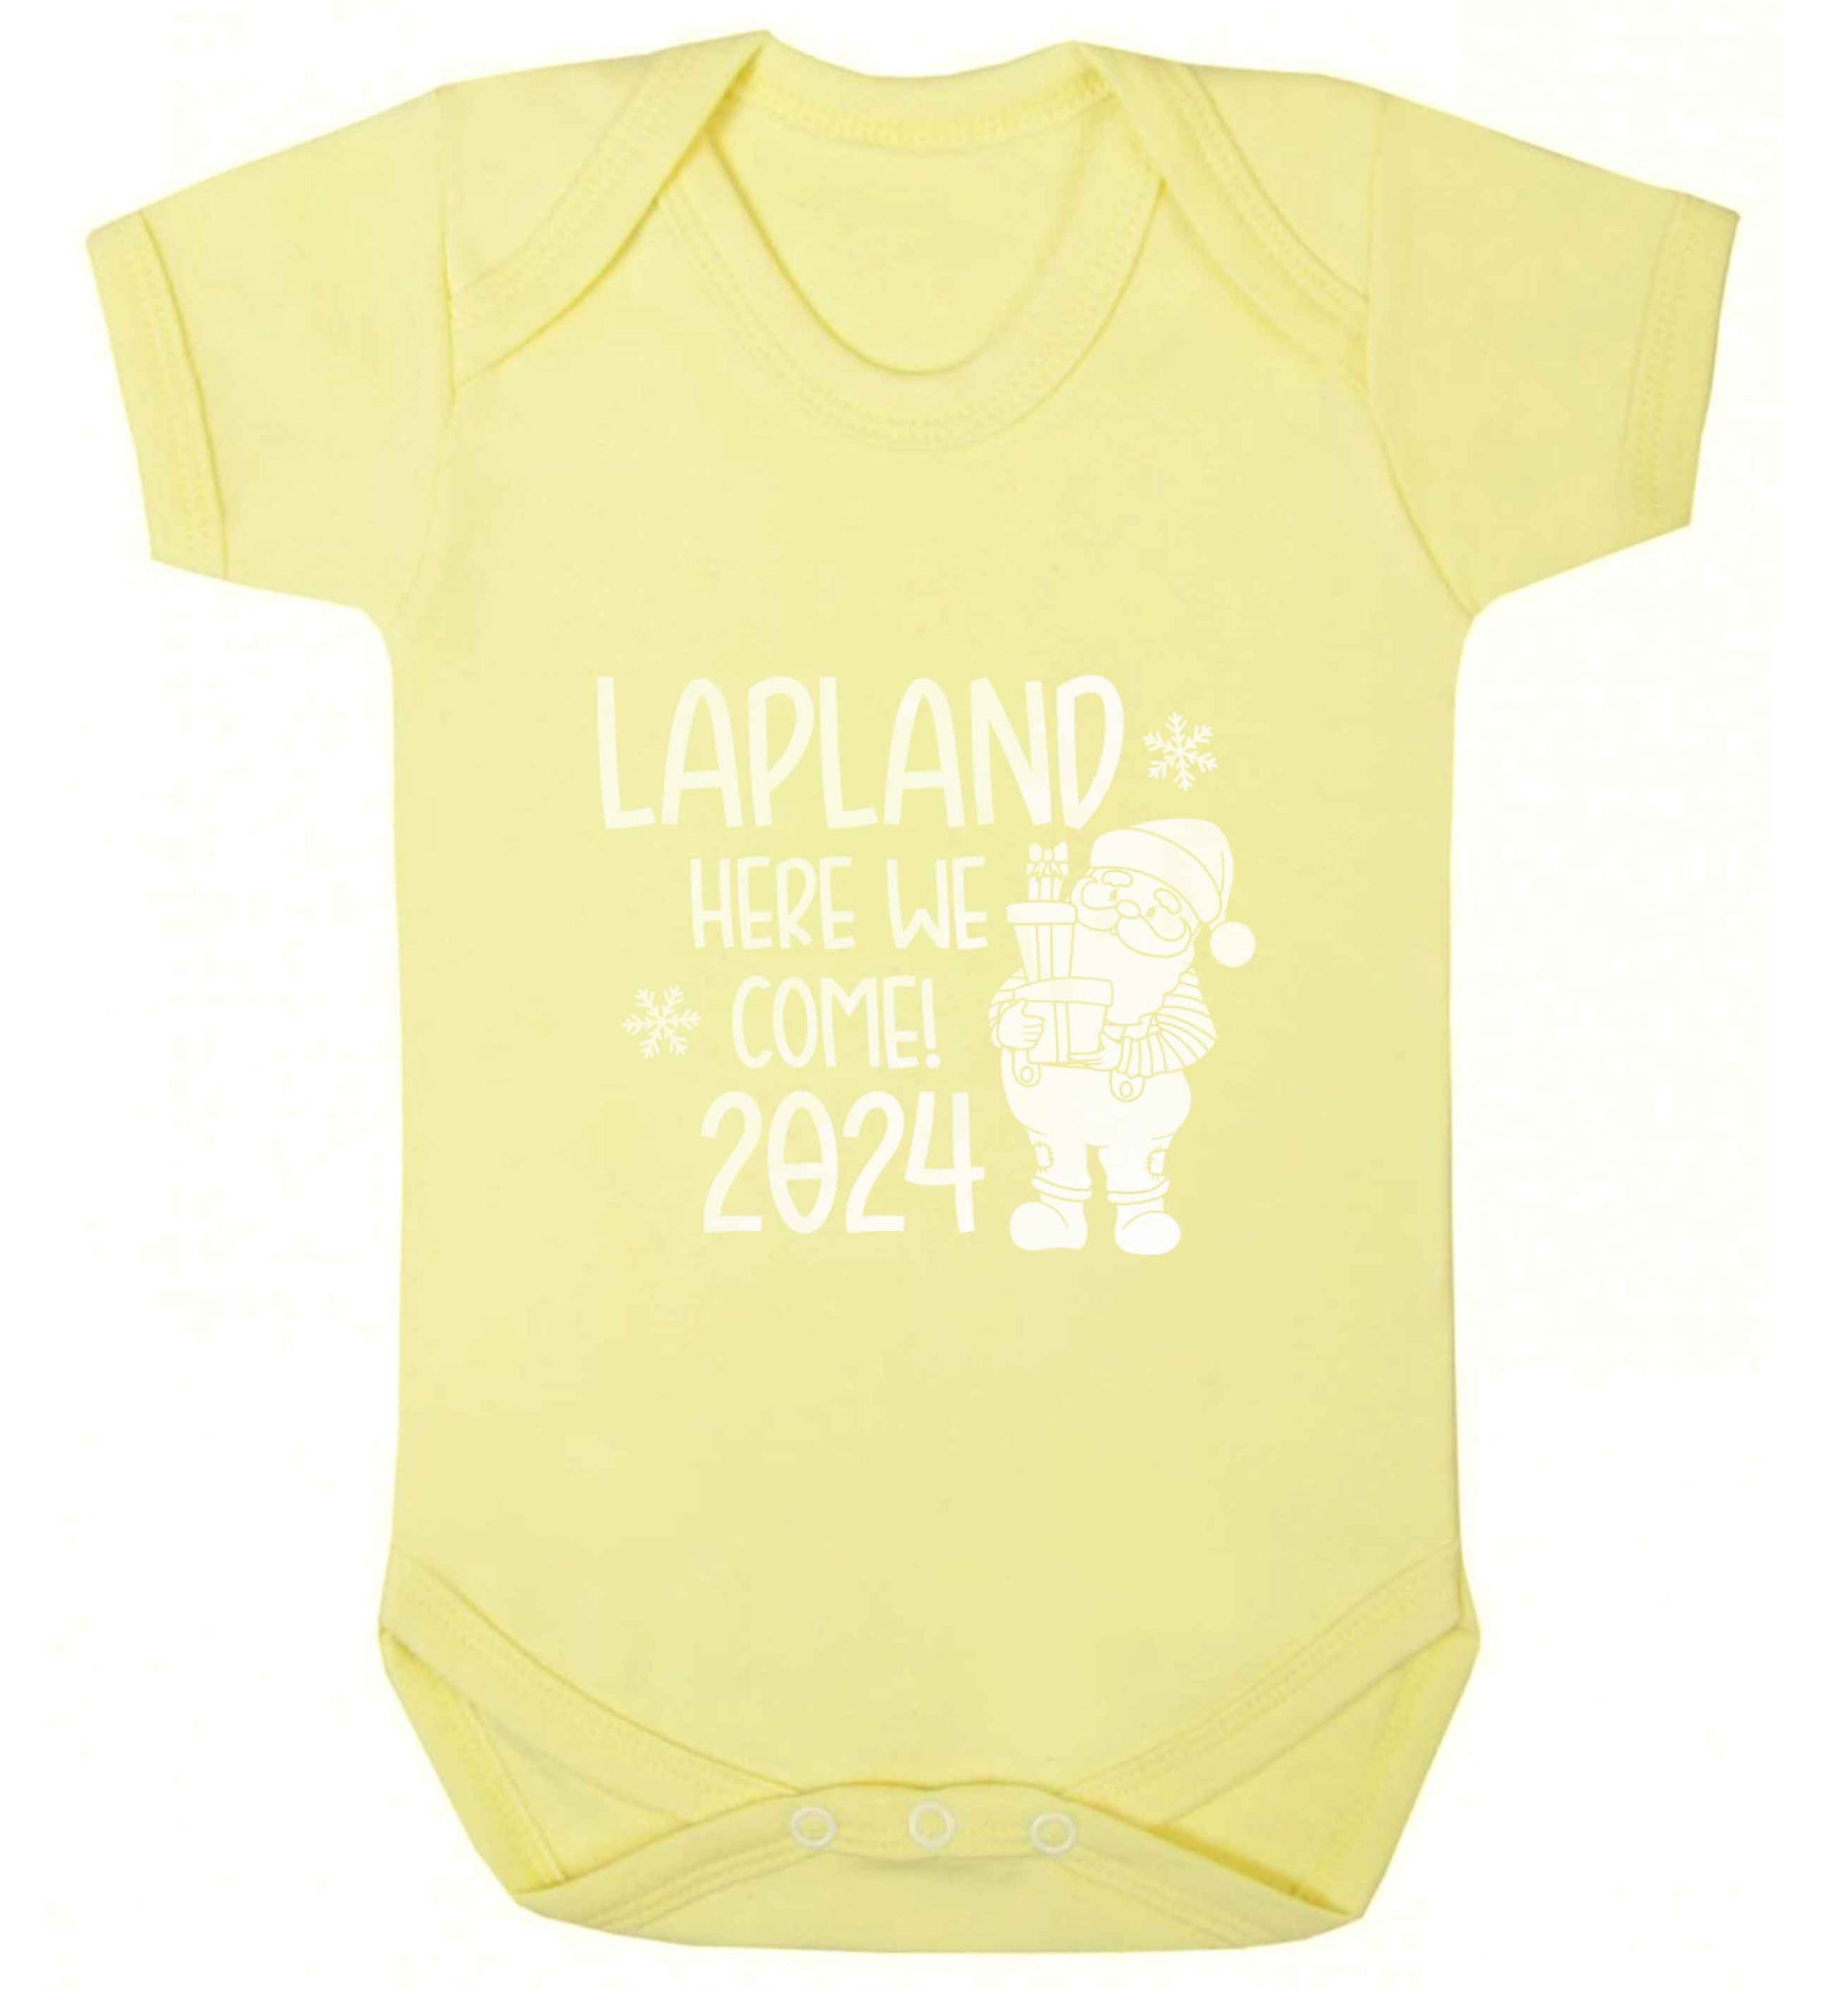 Lapland here we come baby vest pale yellow 18-24 months